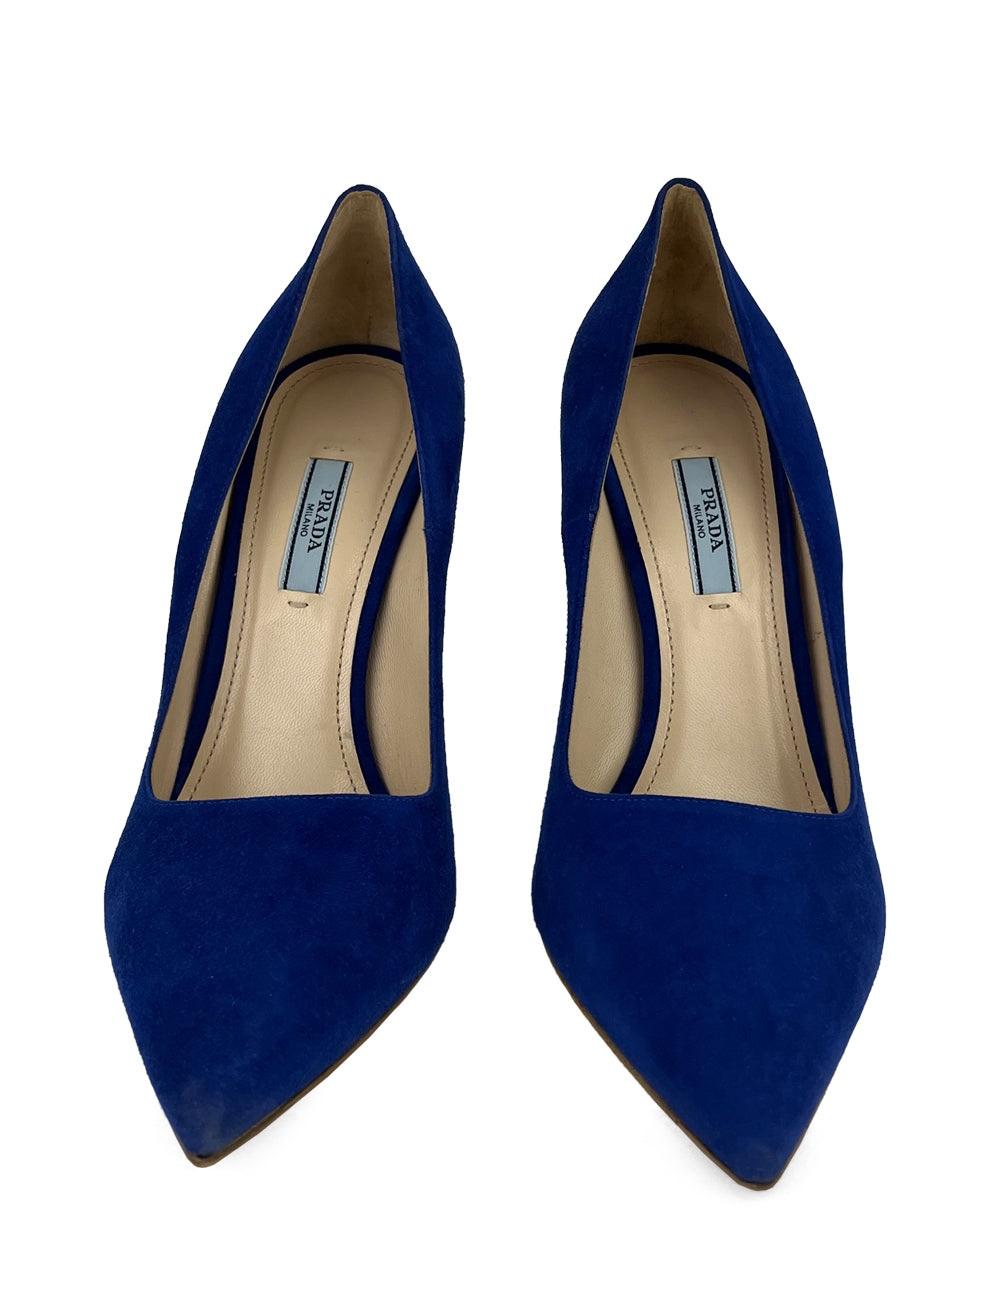 Prada Royal blue suede pointed-toe pumps. In excellent condition.

Additional information:
Material: Suede
Size: EU 40 
Measurements: Heel Length: 12 cm
Overall Condition: Good
Interior Condition: signs of wear
Exterior Condition: Scuffing and light